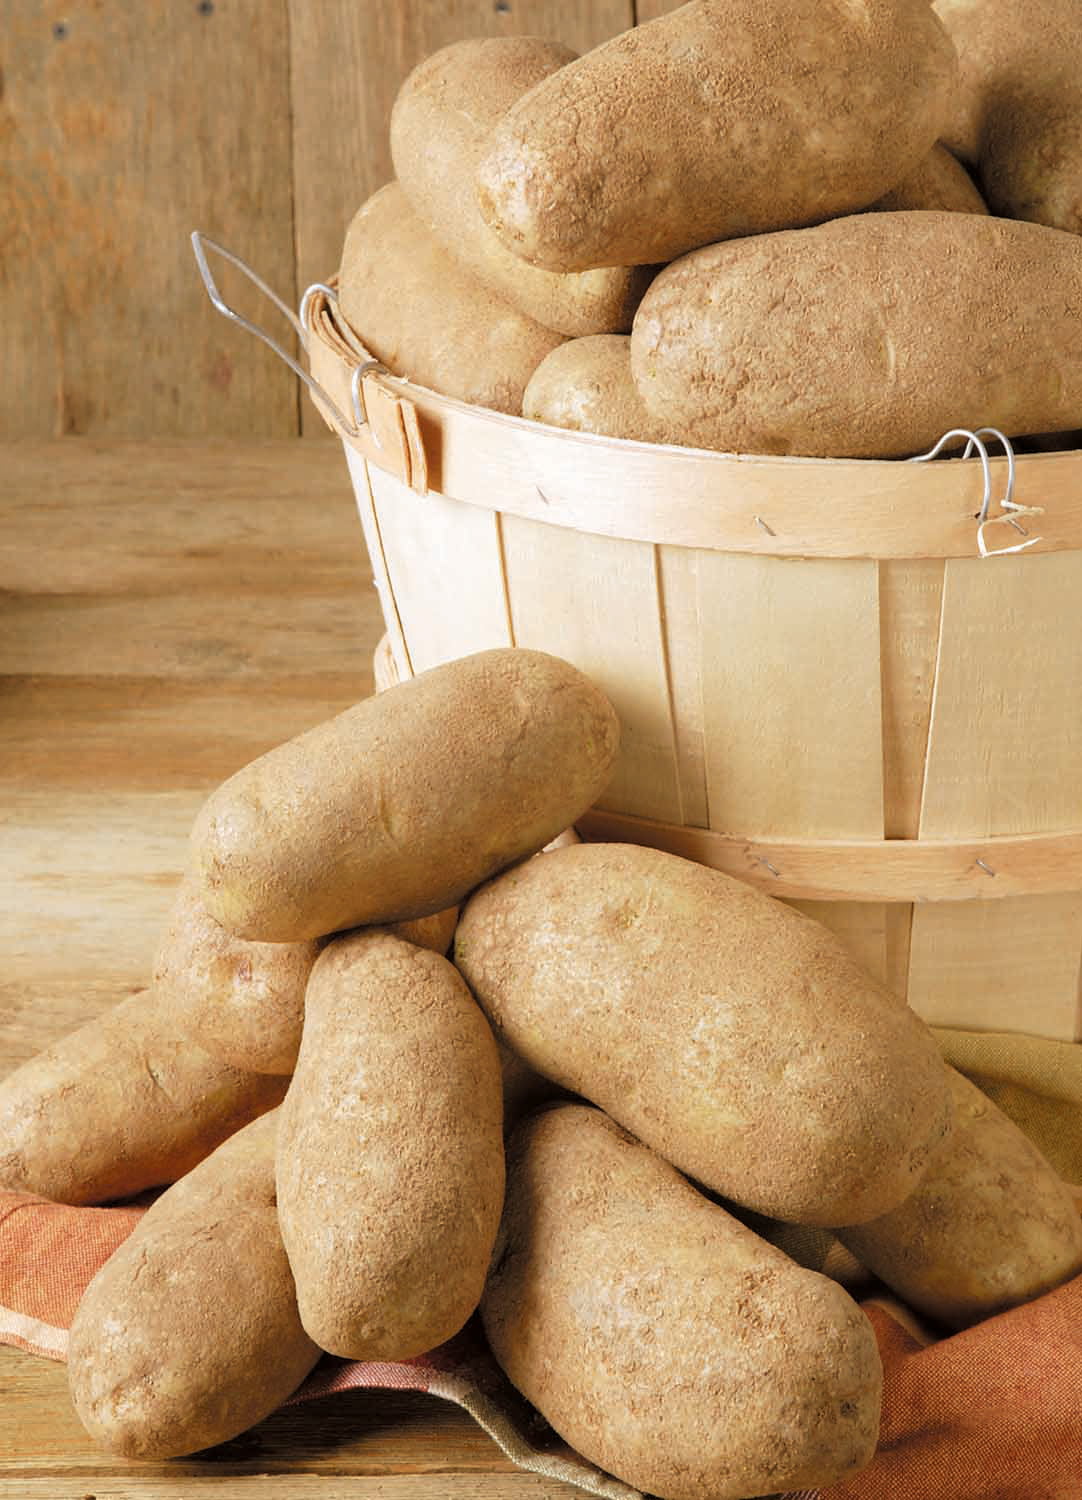 Russet Potatoes in a Basket Food Picture